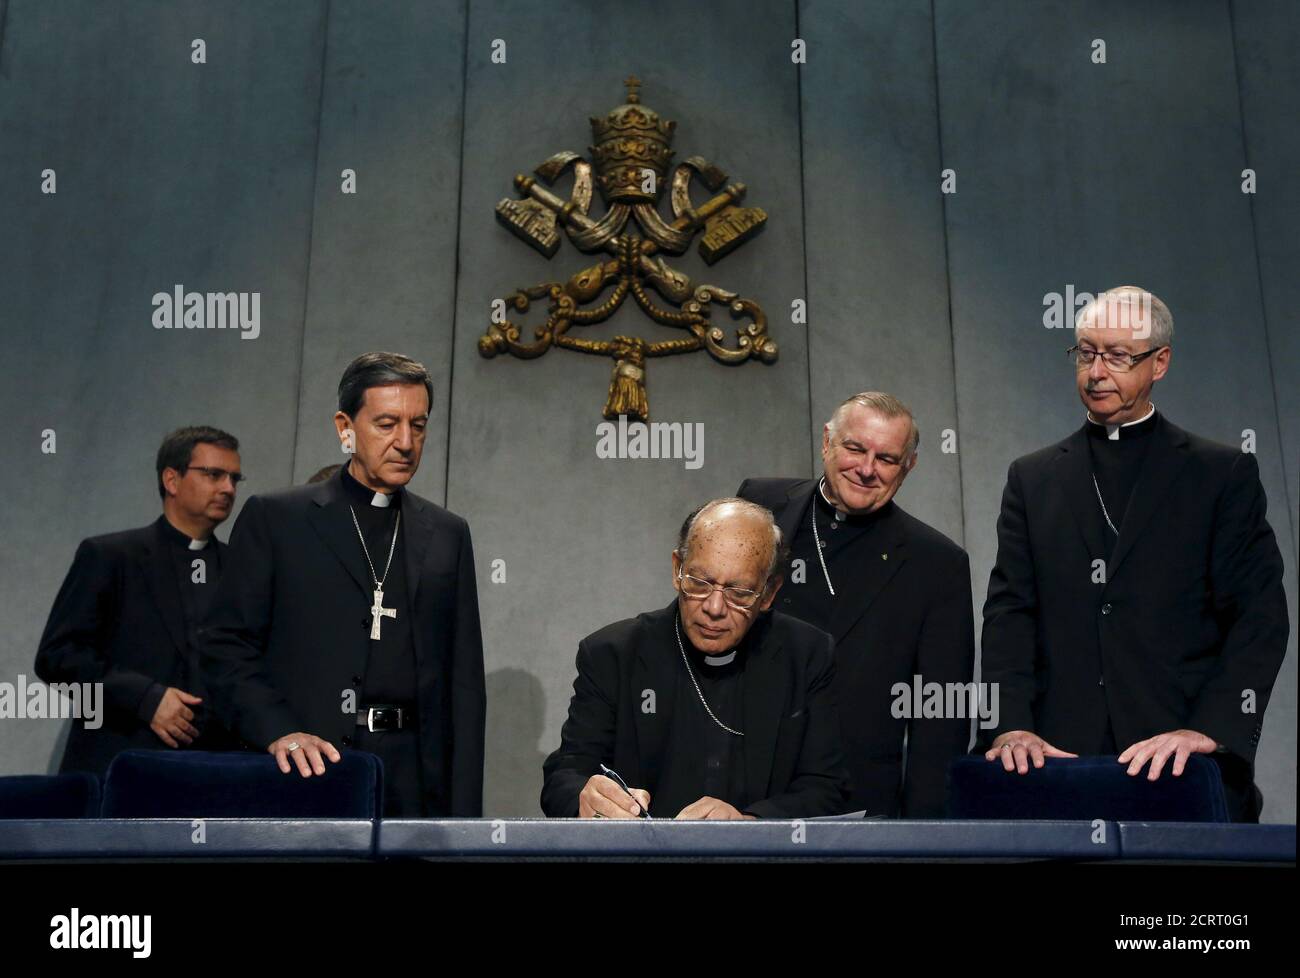 Cardinal Oswald Gracias (C) signs an appeal next to Cardinal Ruben Salazar Gomez (2nd L) during a news conference at the Vatican, October 26, 2015. Roman Catholic leaders from around the world on Monday made a joint appeal to a forthcoming United Nations conference on climate change to produce a 'fair, legally binding and truly transformational' agreement.REUTERS/Alessandro Bianchi       TPX IMAGES OF THE DAY Stock Photo